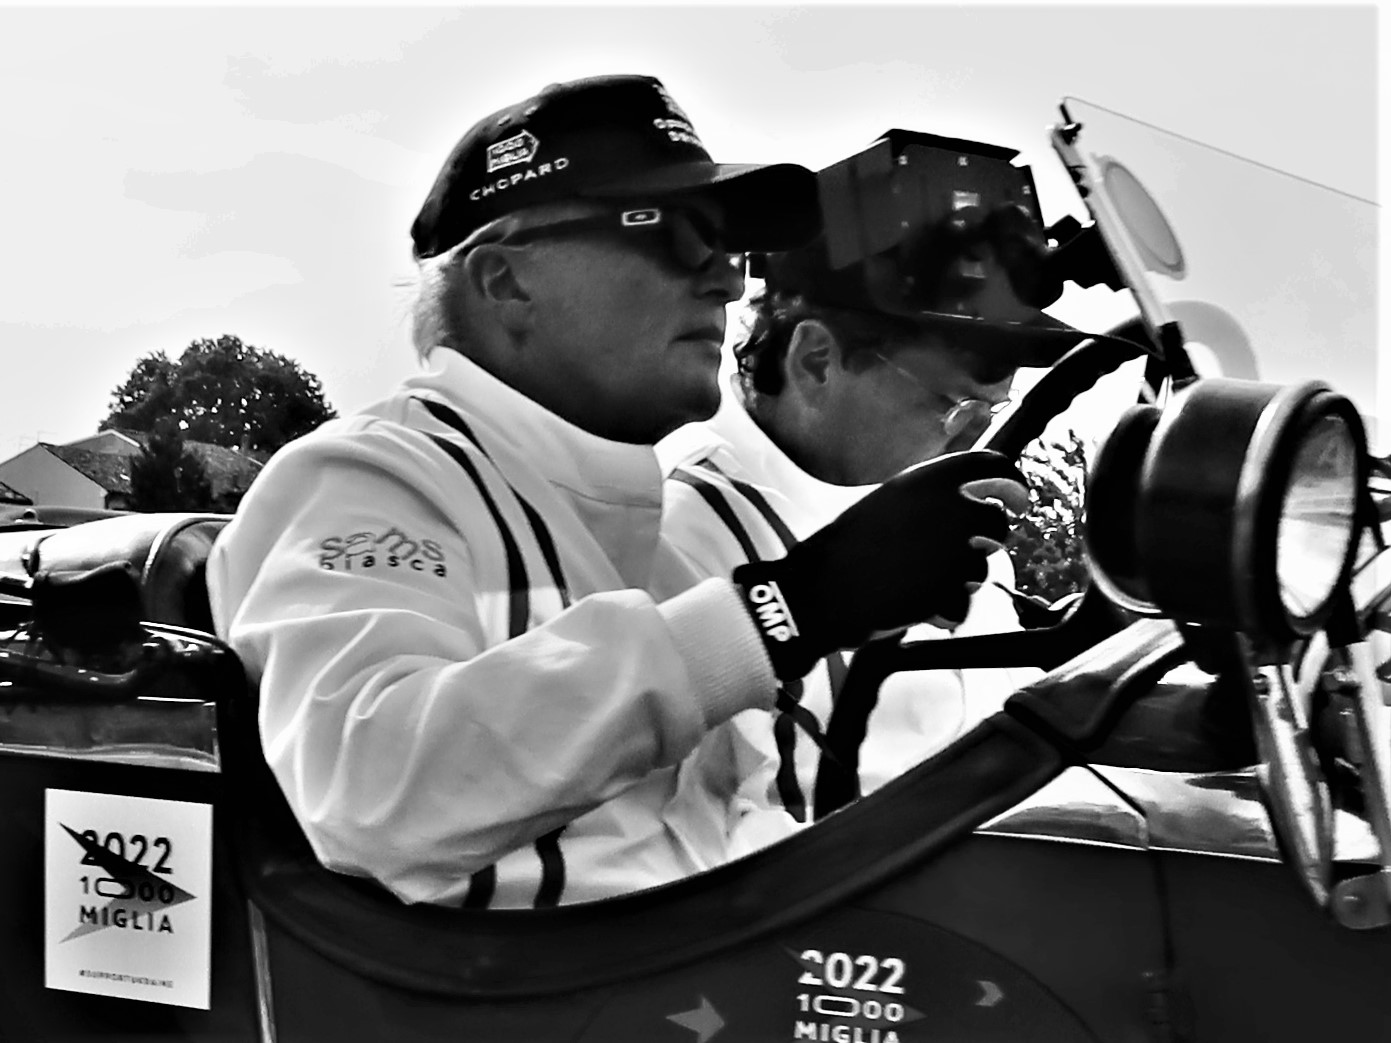 Faces from MilleMiglia 2022...